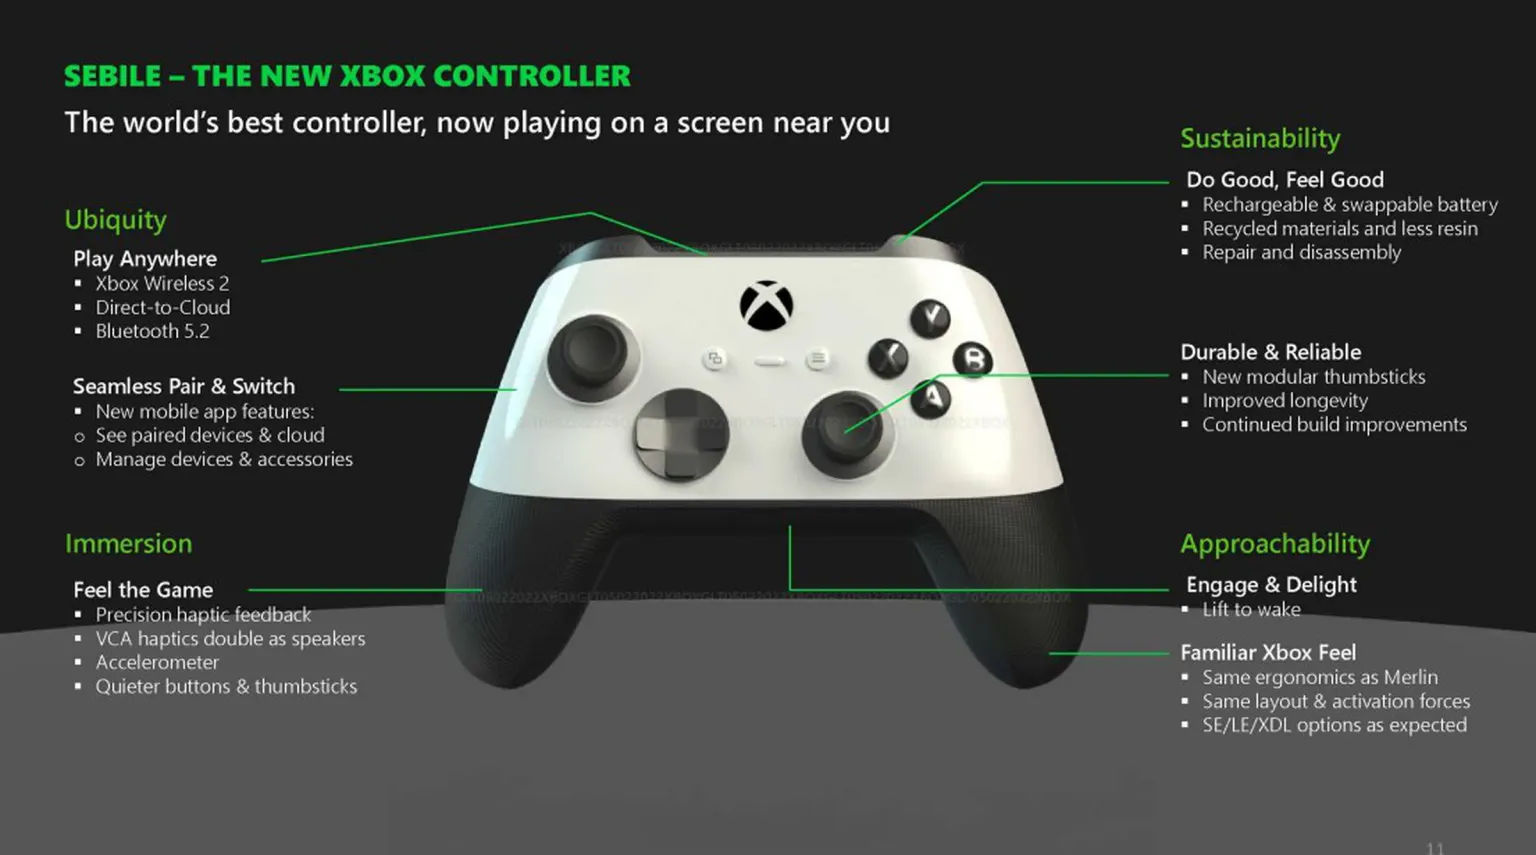 Image showing an Xbox controller called "Sebile," which has a white top half and a black lower half.